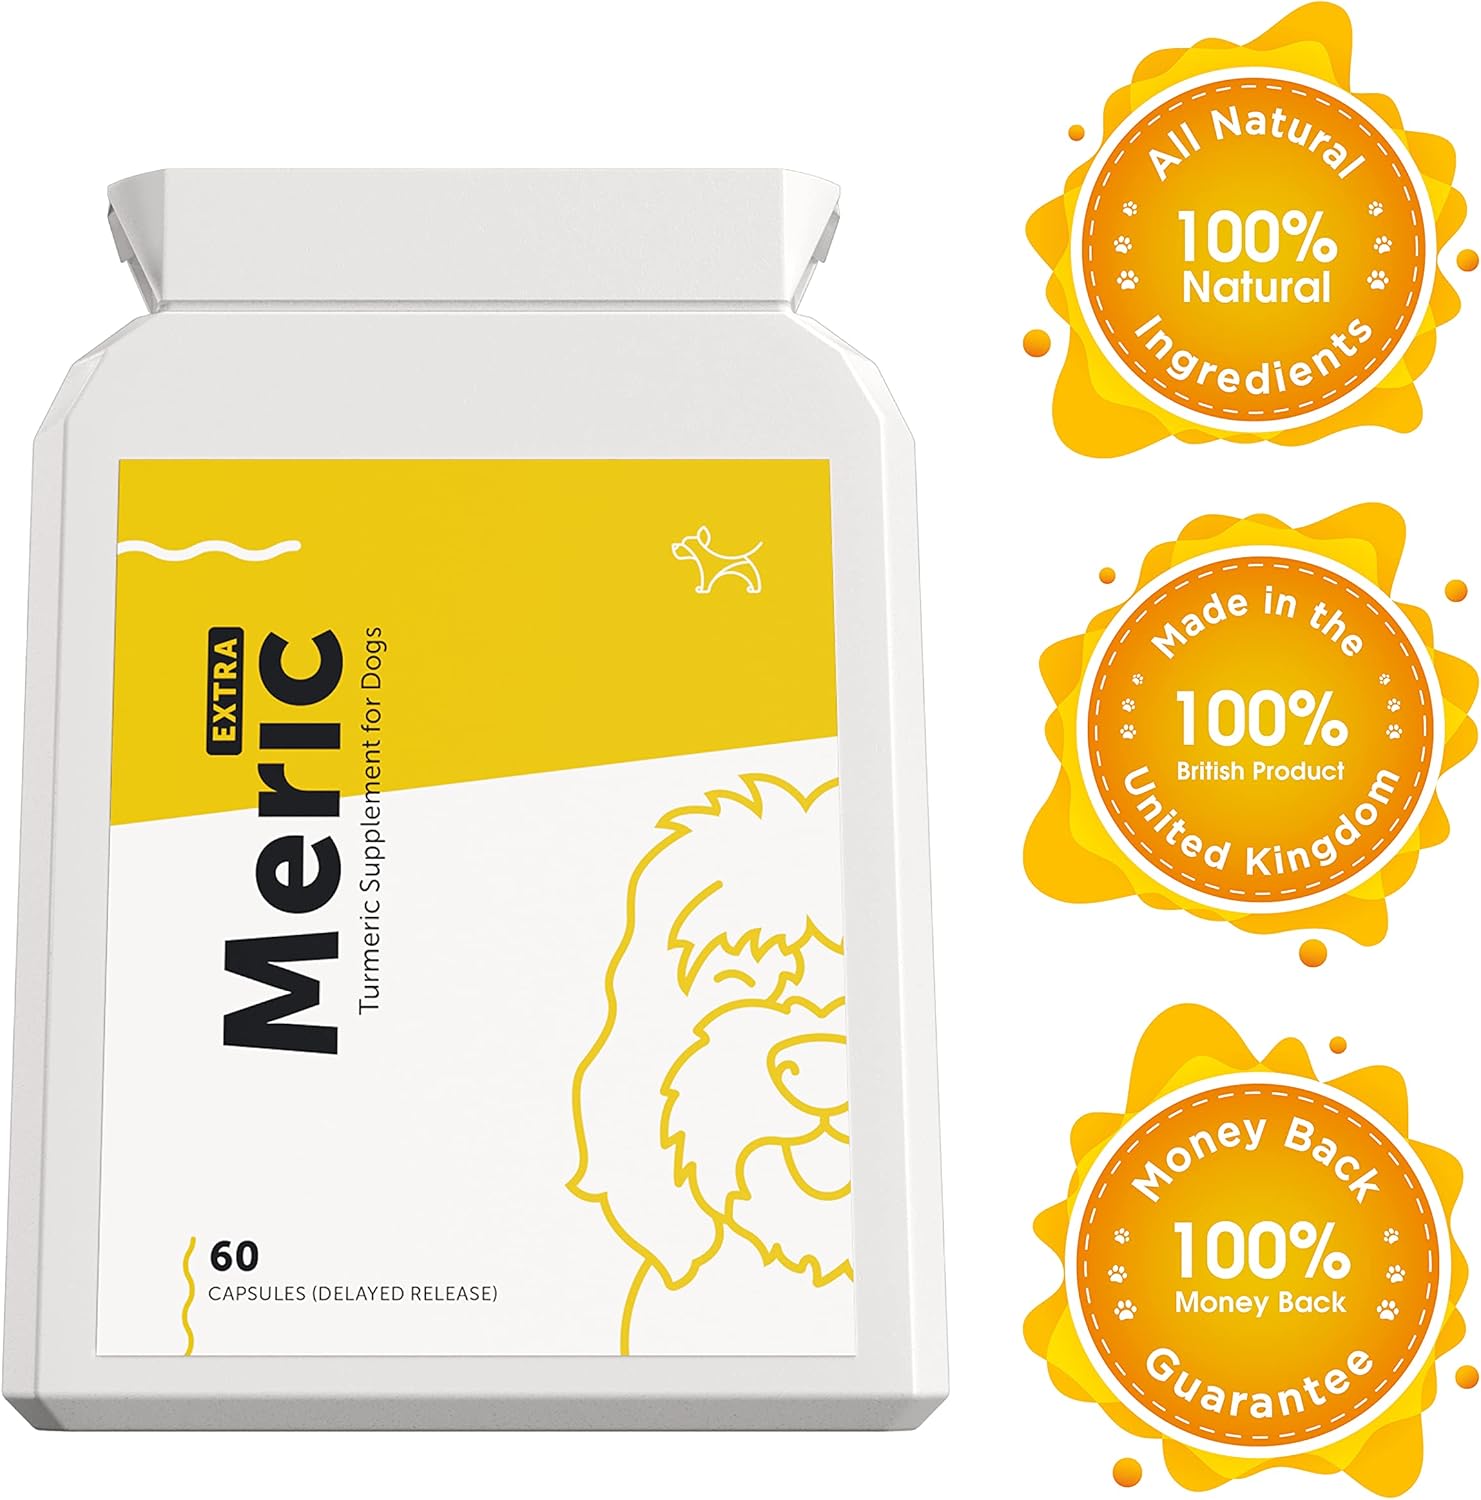 Dog's Lounge - Meric - Advanced Turmeric Extract for Dogs with 95% Curcuminoids and Black Pepper - Antioxidant Hip & Joint Care Supplement Made in the UK (60 Capsules) :Pet Supplies